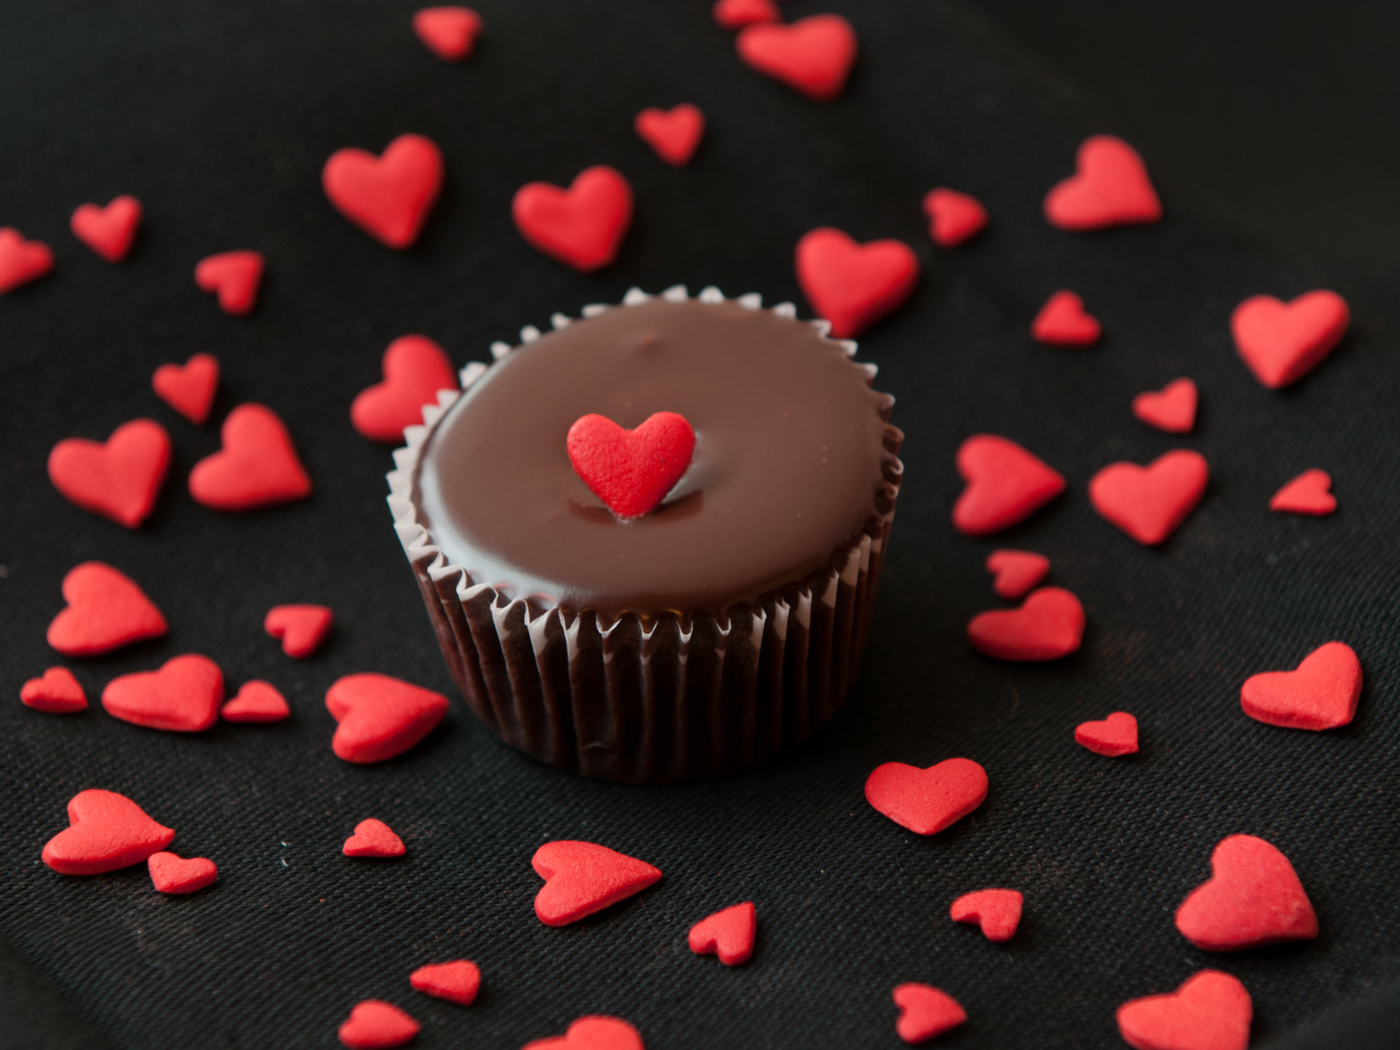 Chocolate Cupcake With Red Heart wallpaper 1400x1050